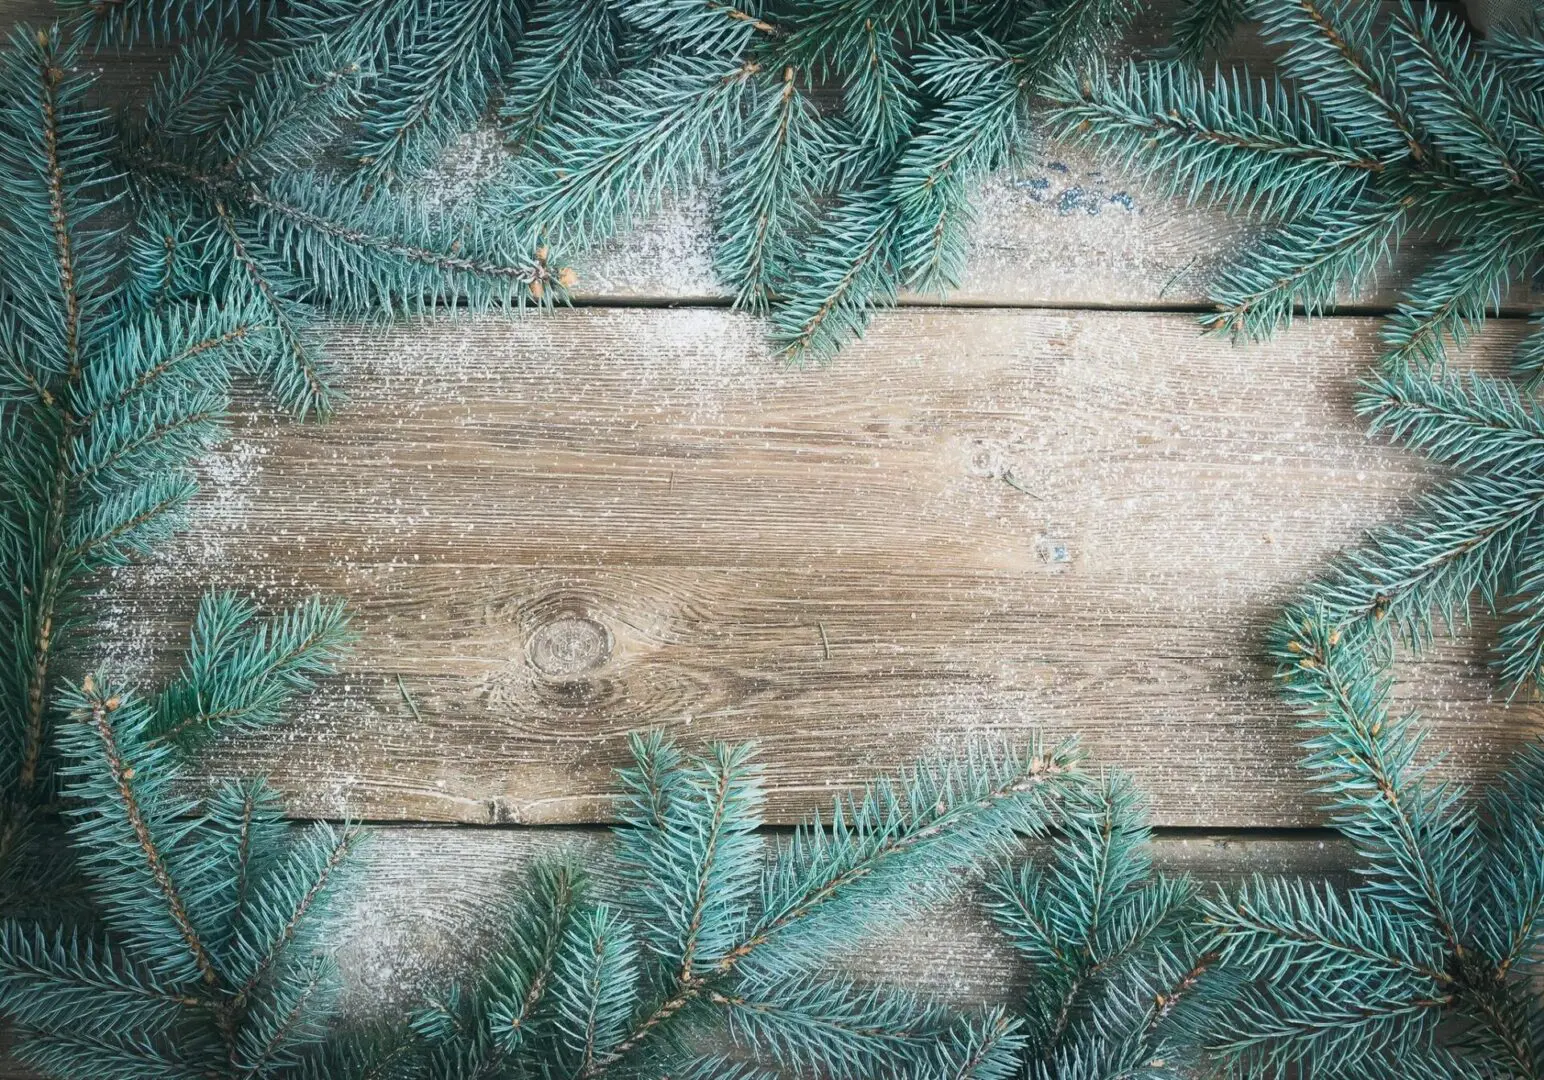 Blue fir branches on a wooden background.